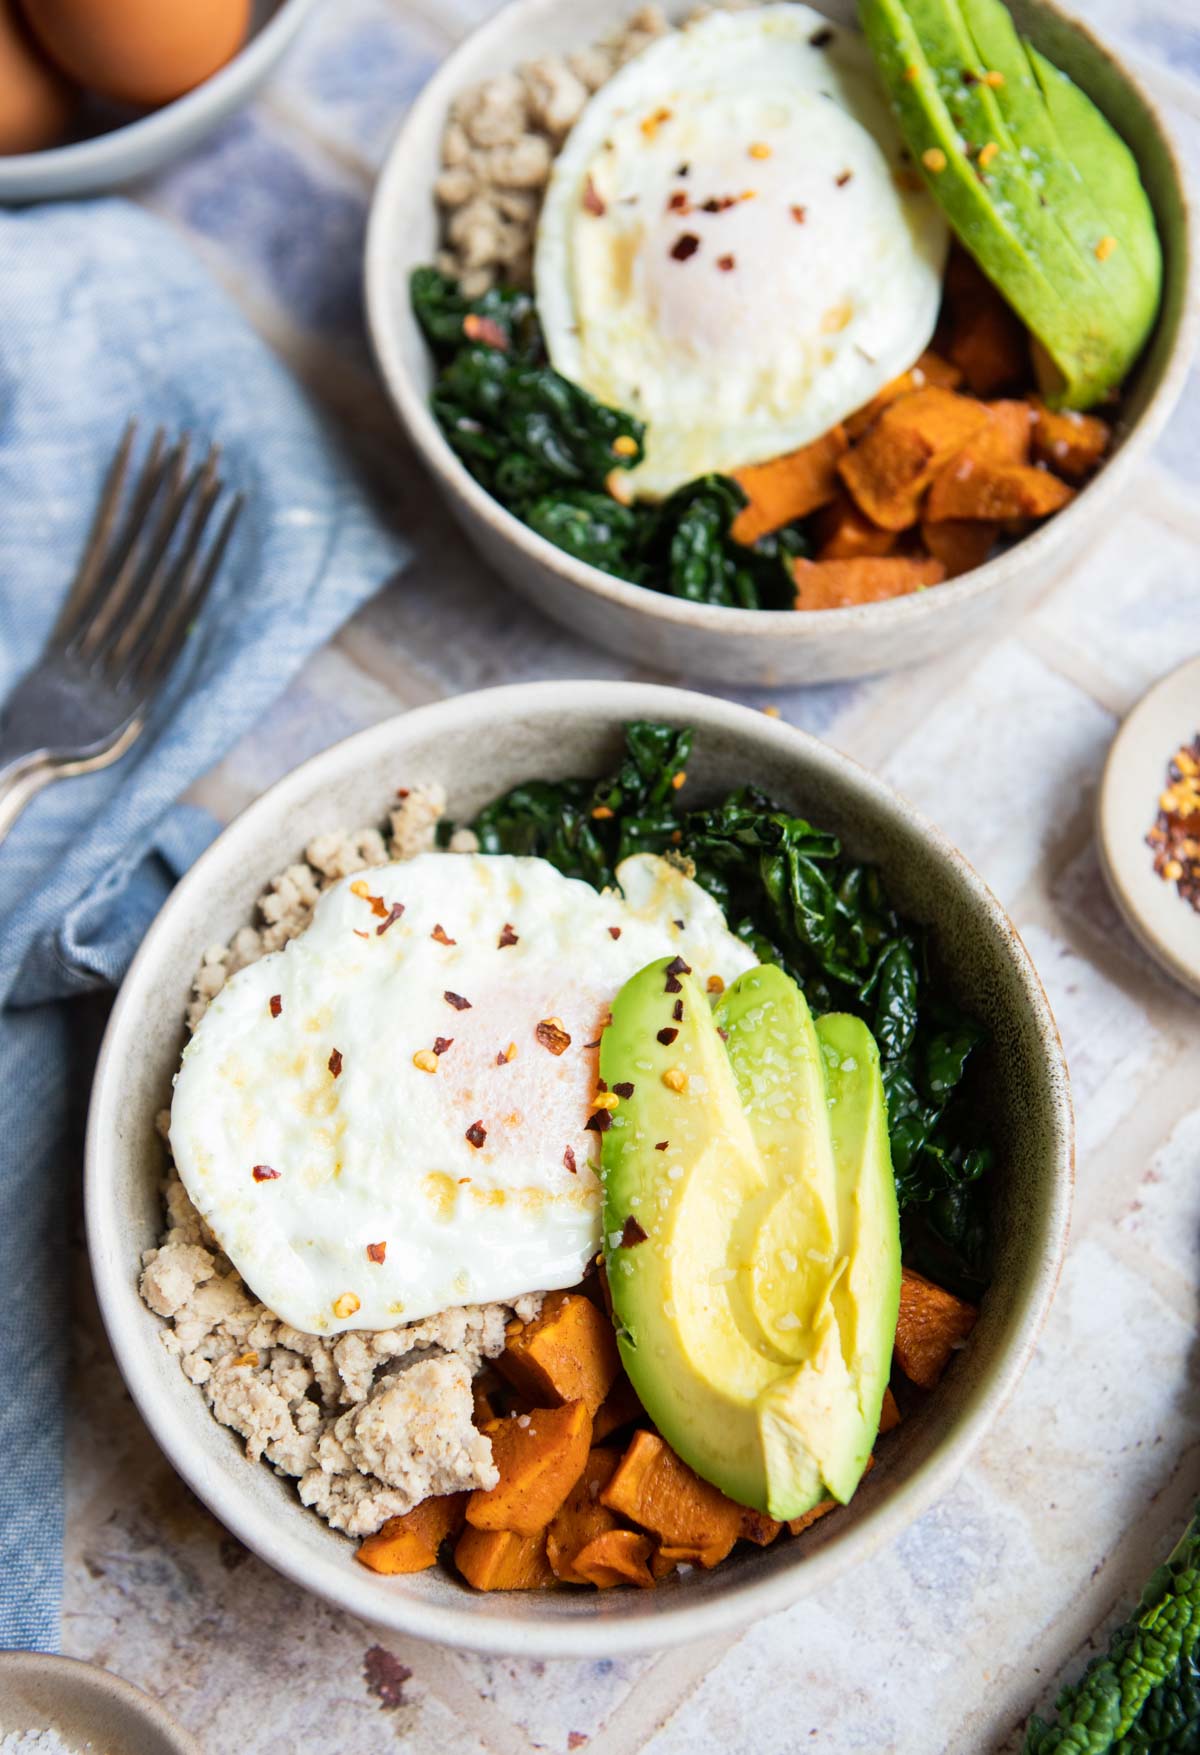 beige bowls filled with cooked kale, ground turkey, sweet potatoes and topped with an egg and avocado 